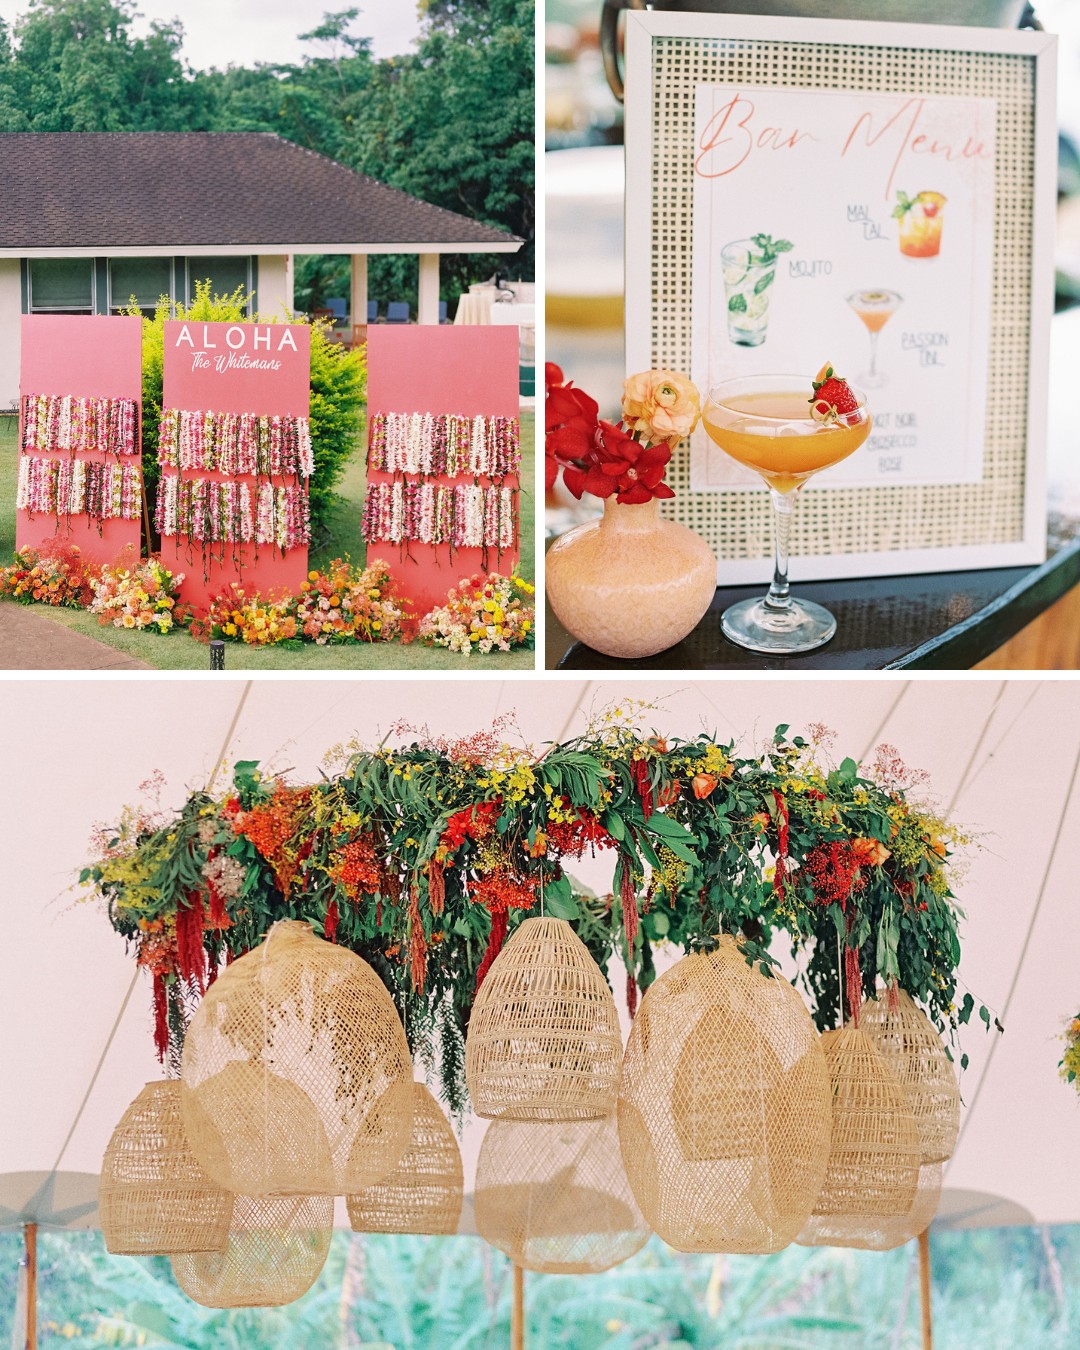 aloha sign with leis, cocktail menu, basket lanterns hanging from red and green floral installment